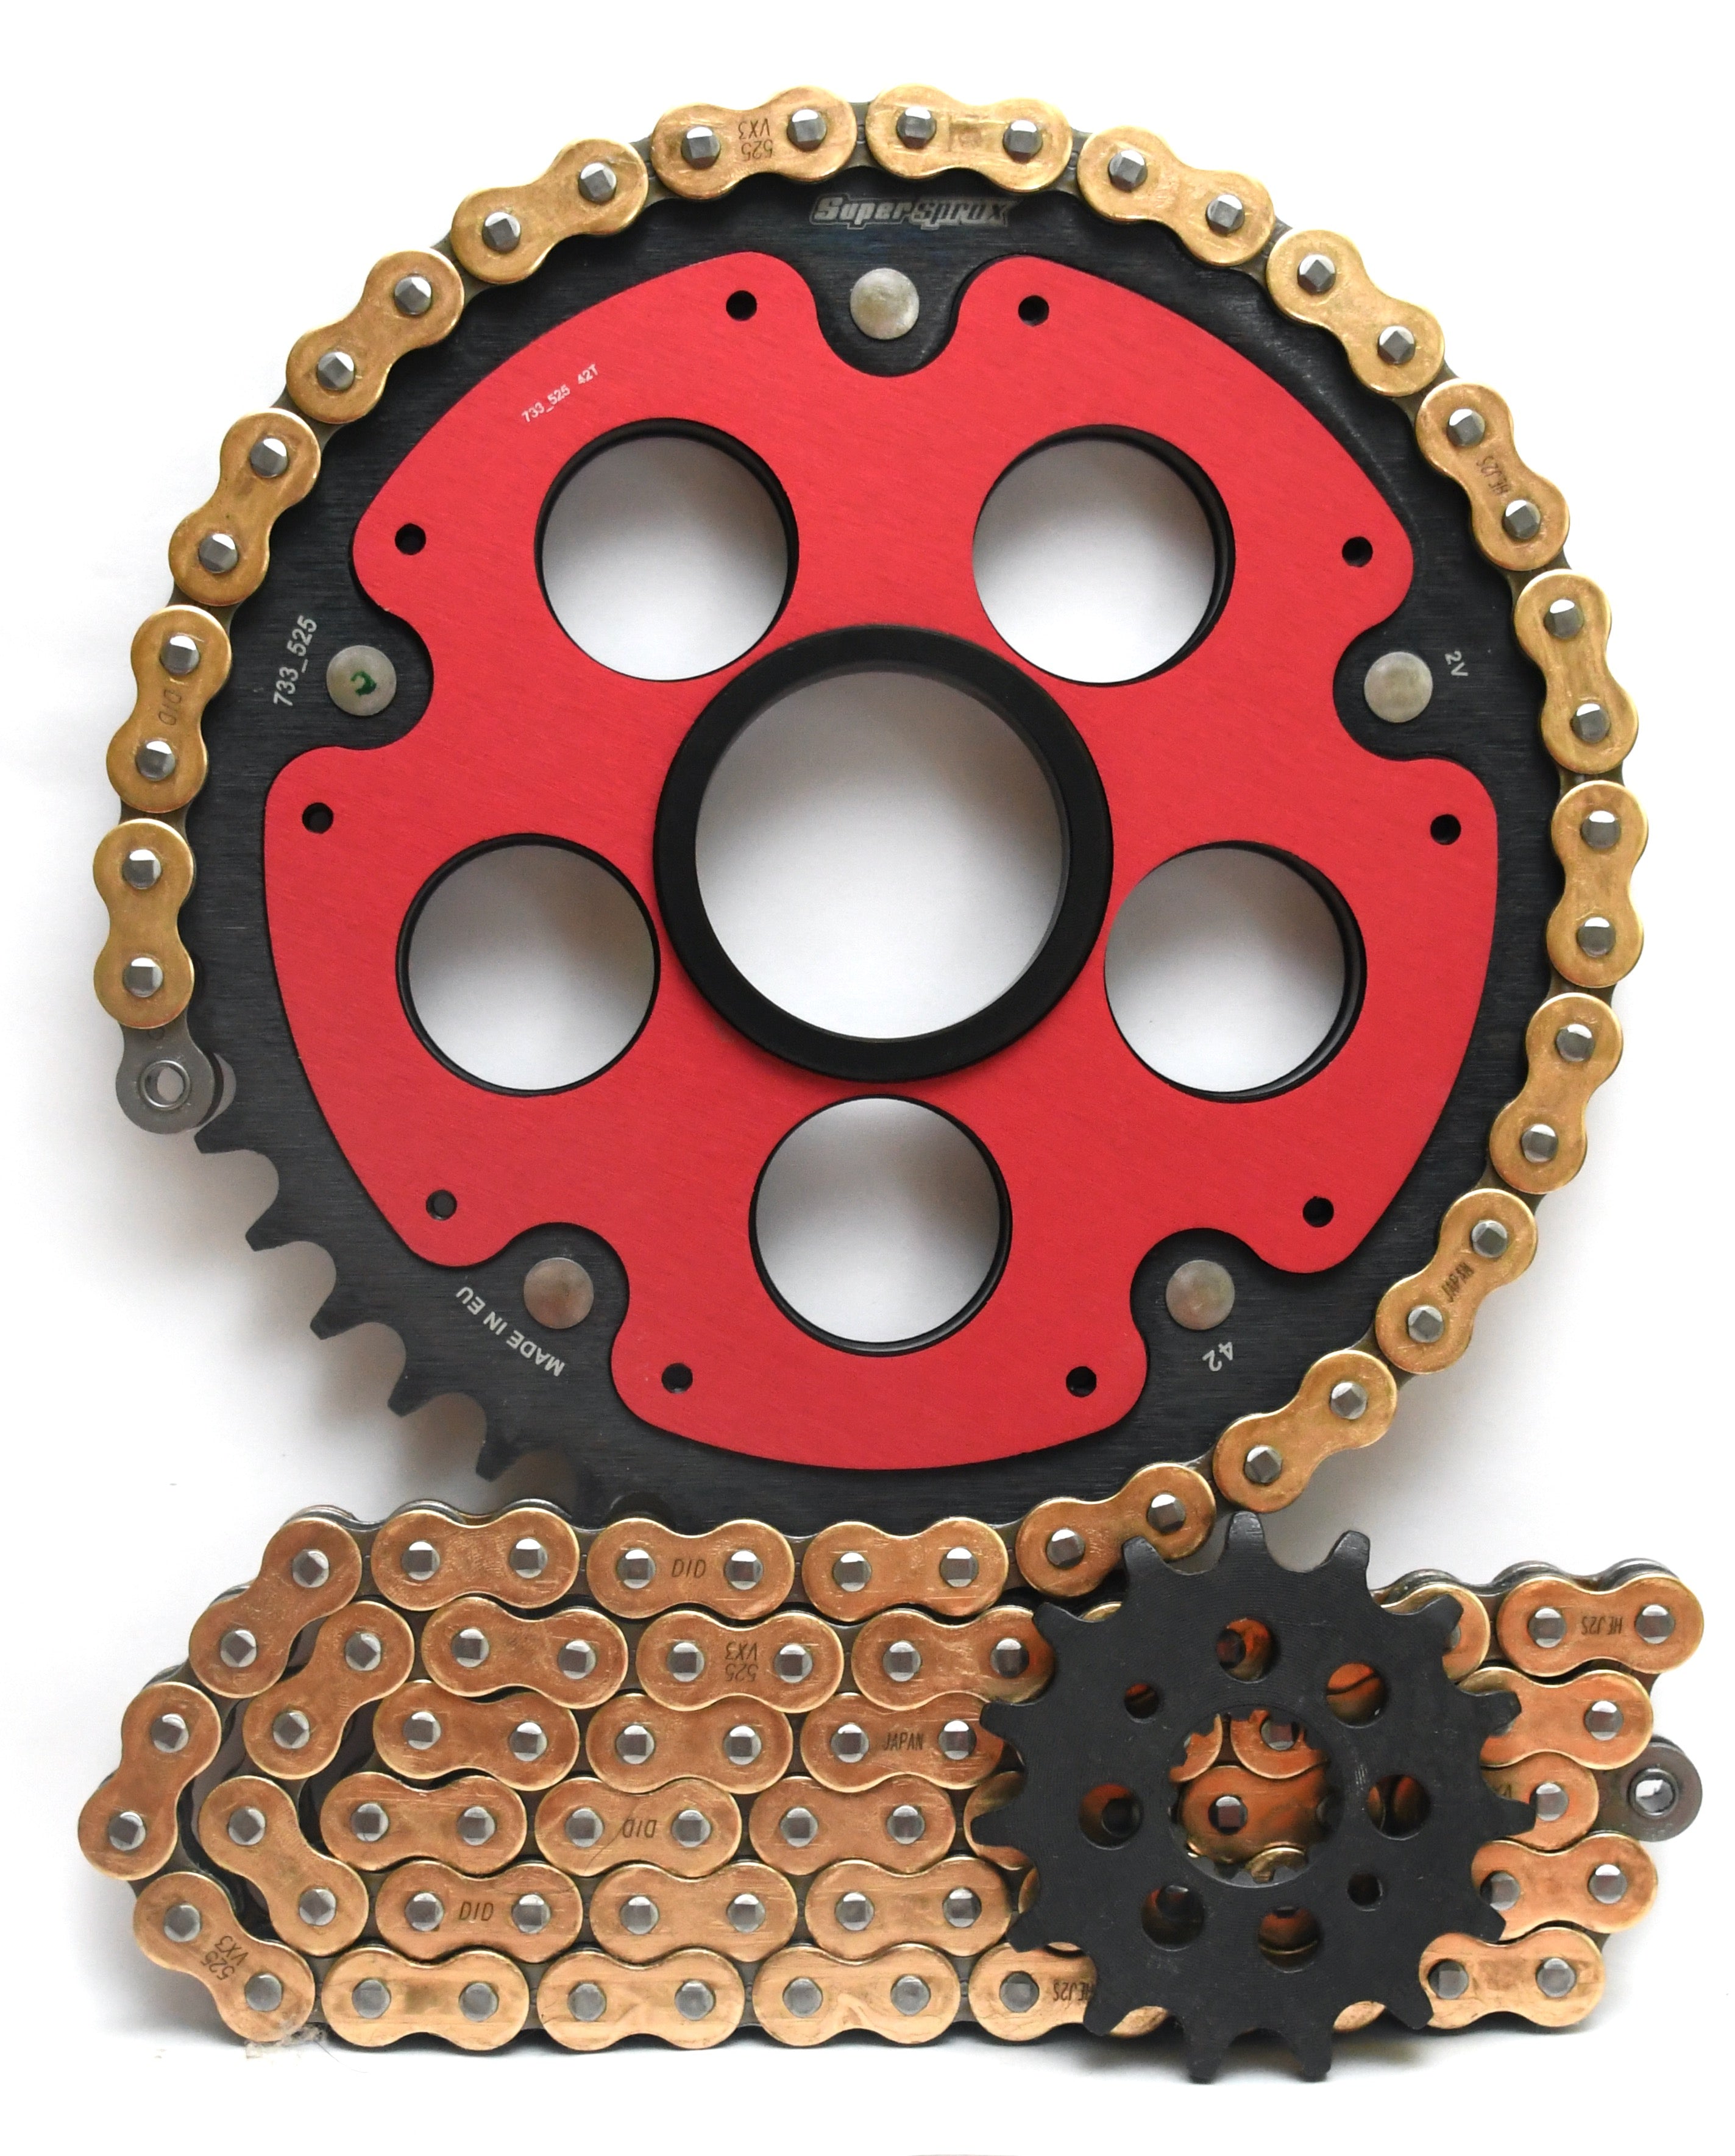 Supersprox Chain & Sprocket Kit for Ducati Monster 796 2010-2014 - Standard Gearing